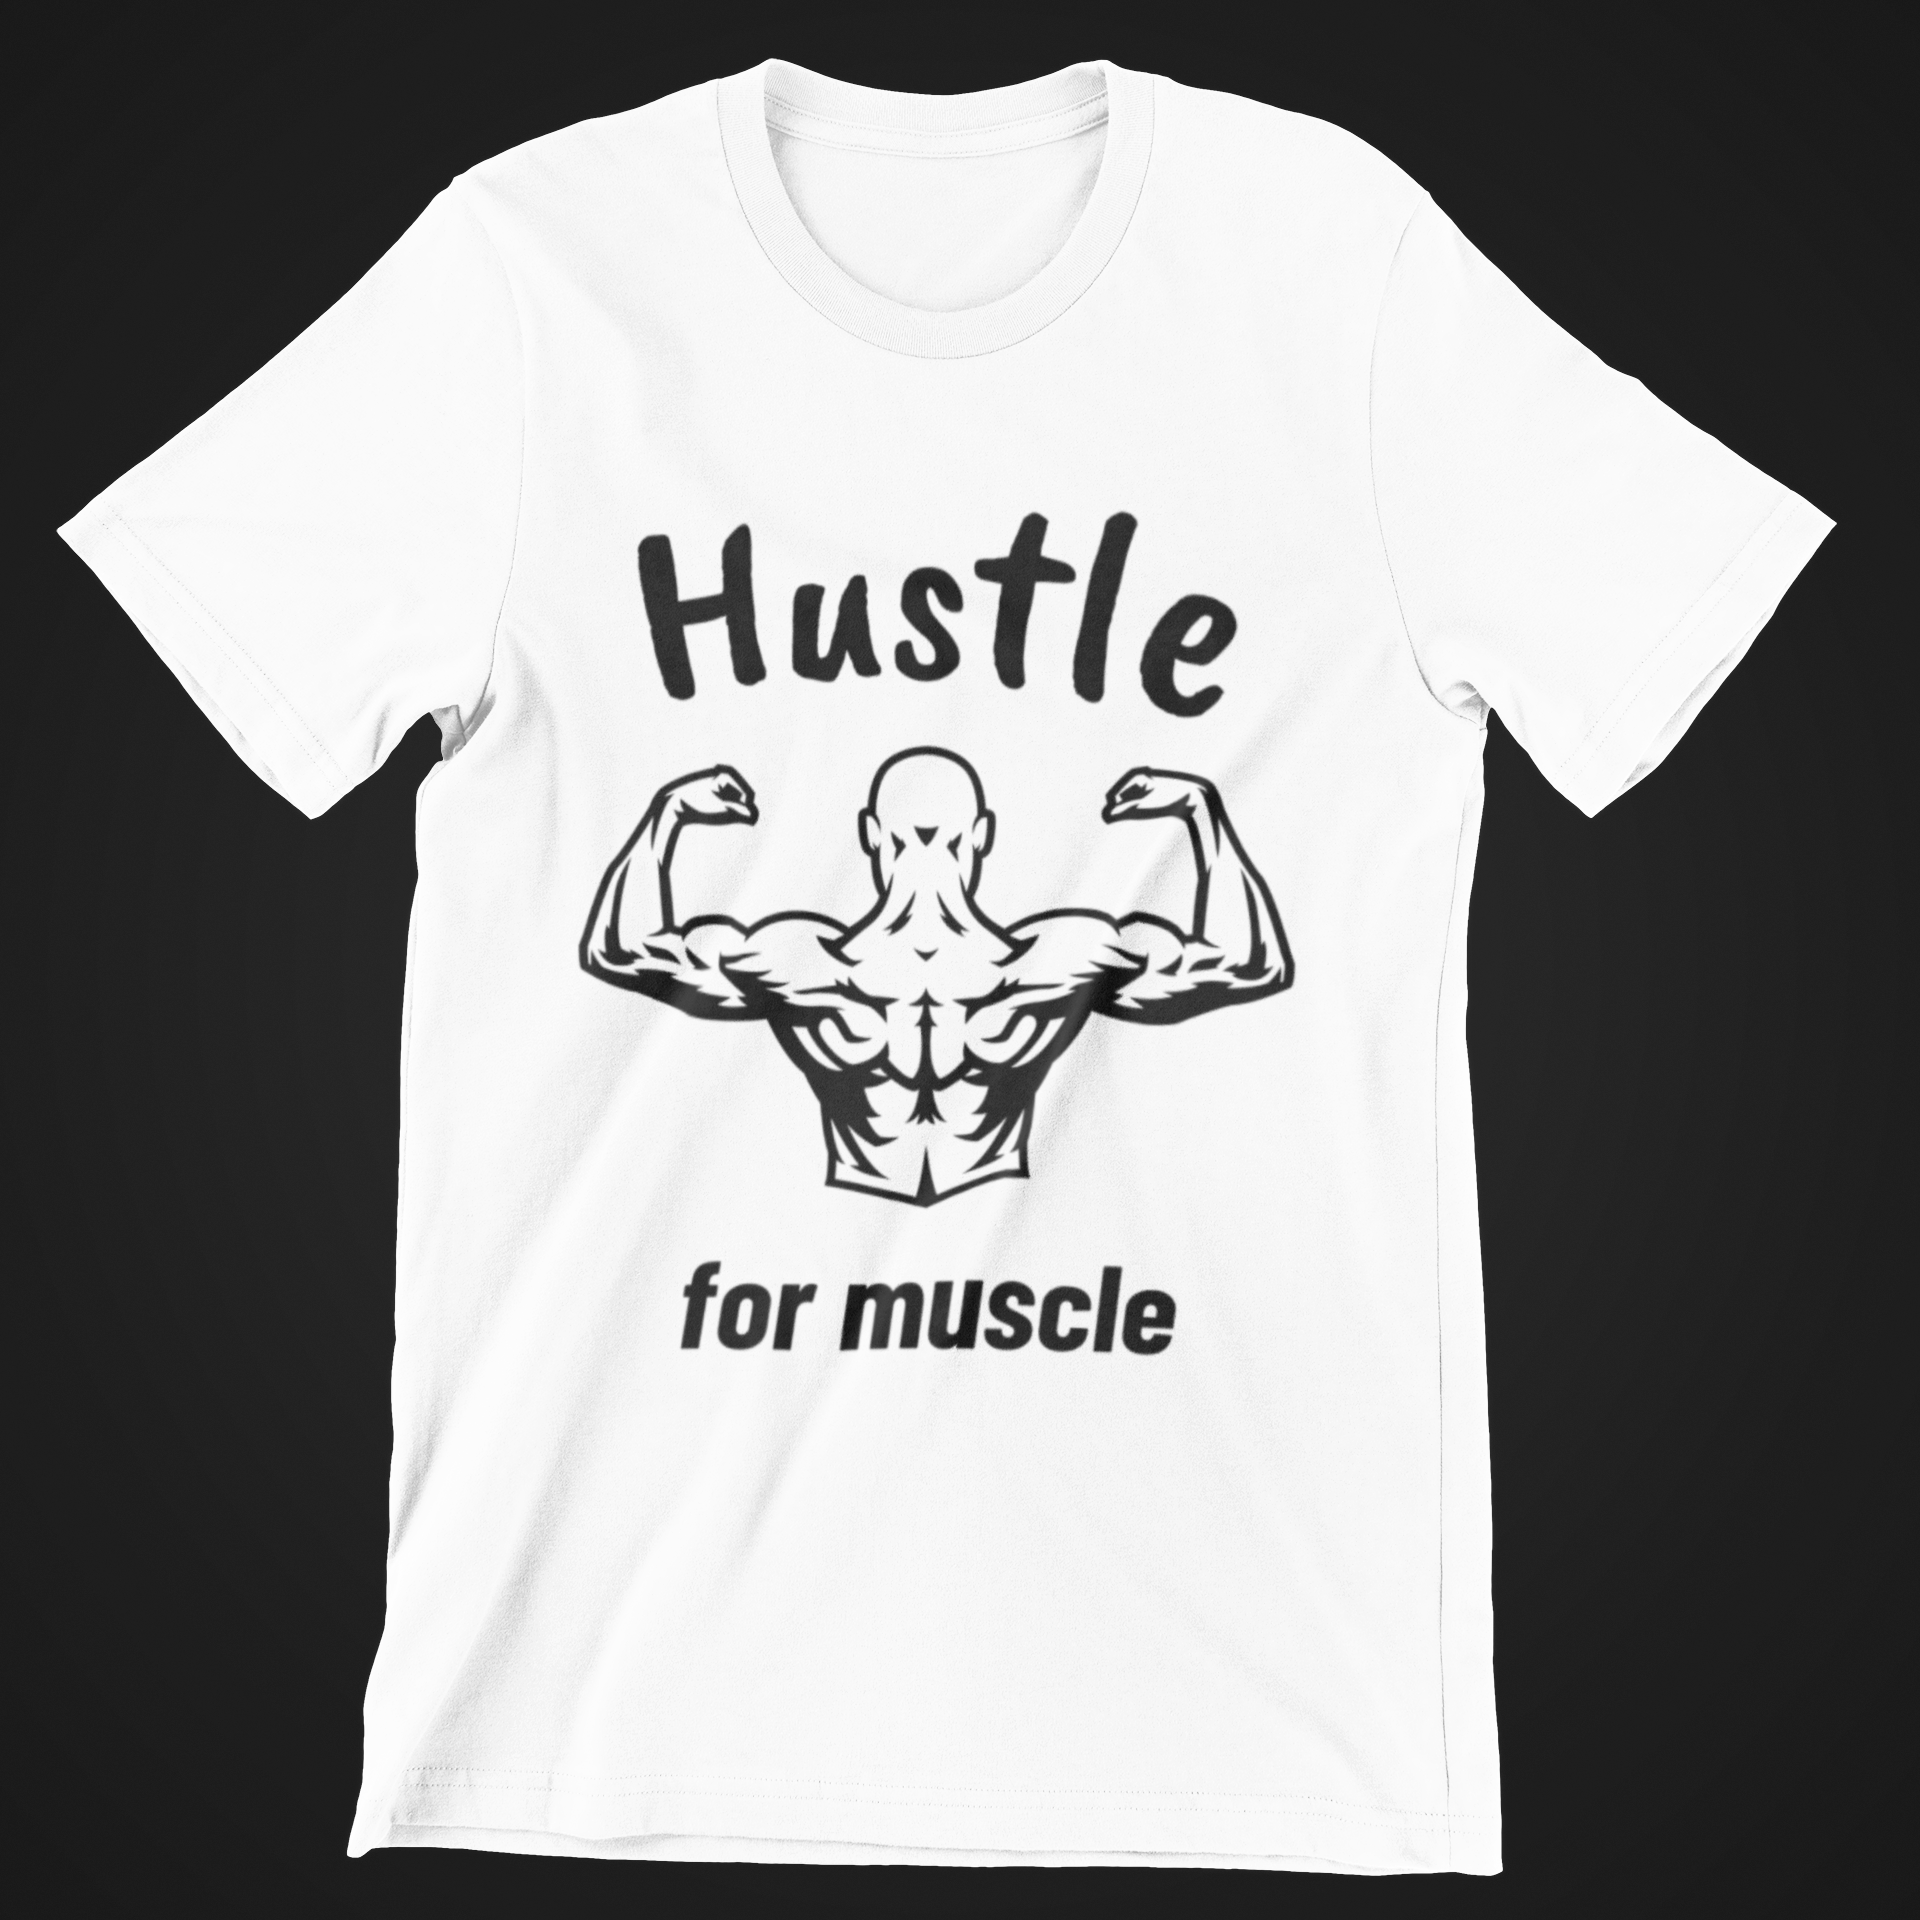 Hustle for muscle